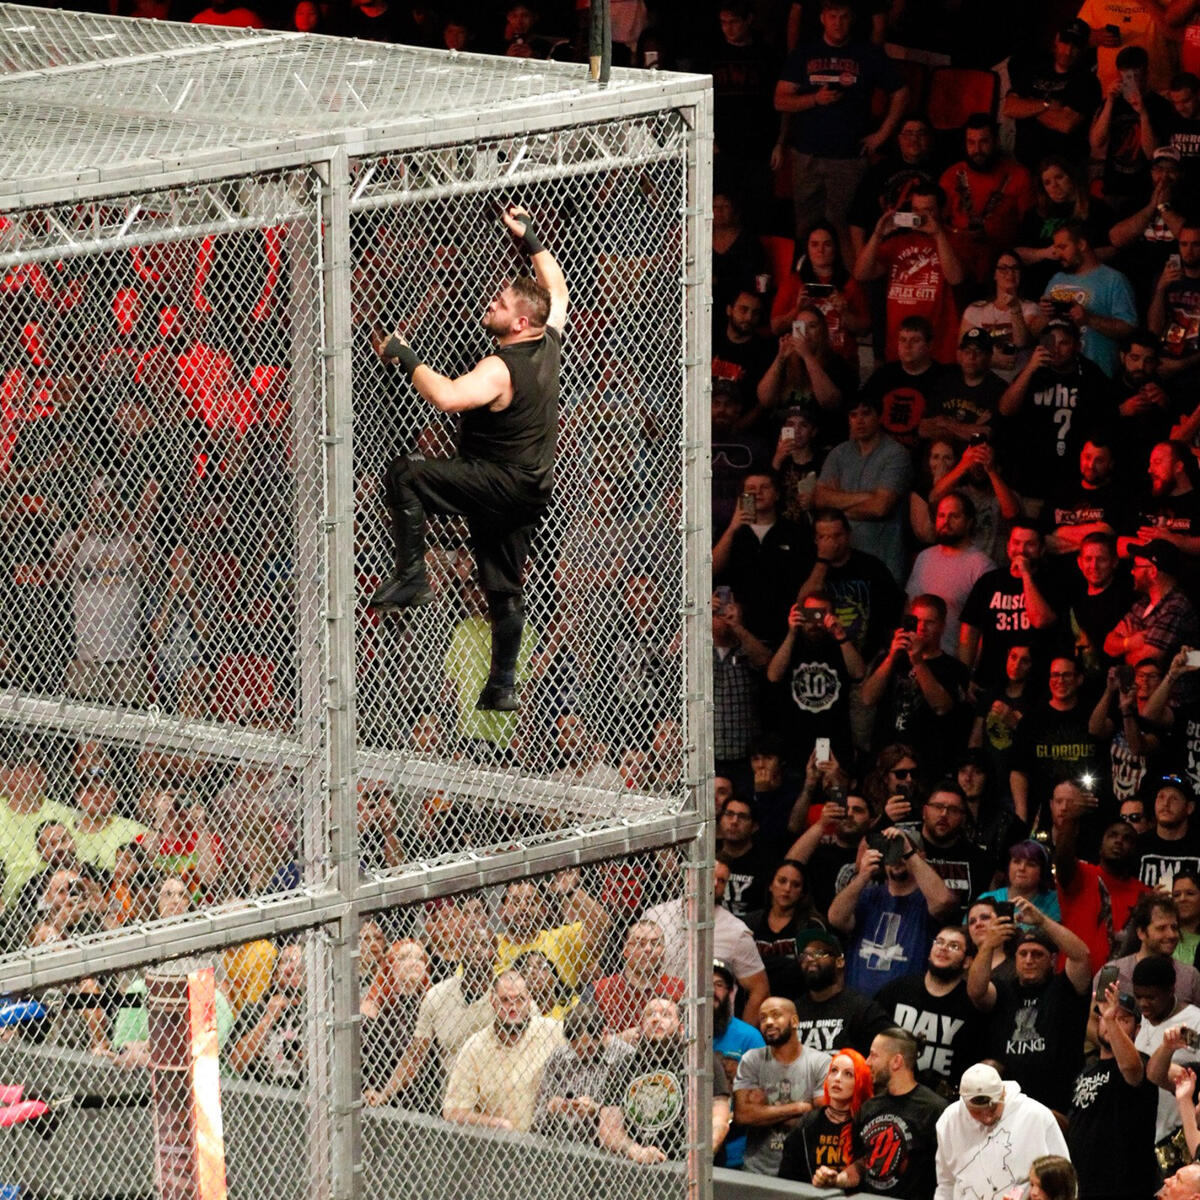 Shane McMahon vs. Kevin Owens - Falls Count Anywhere Hell in a Cell ...